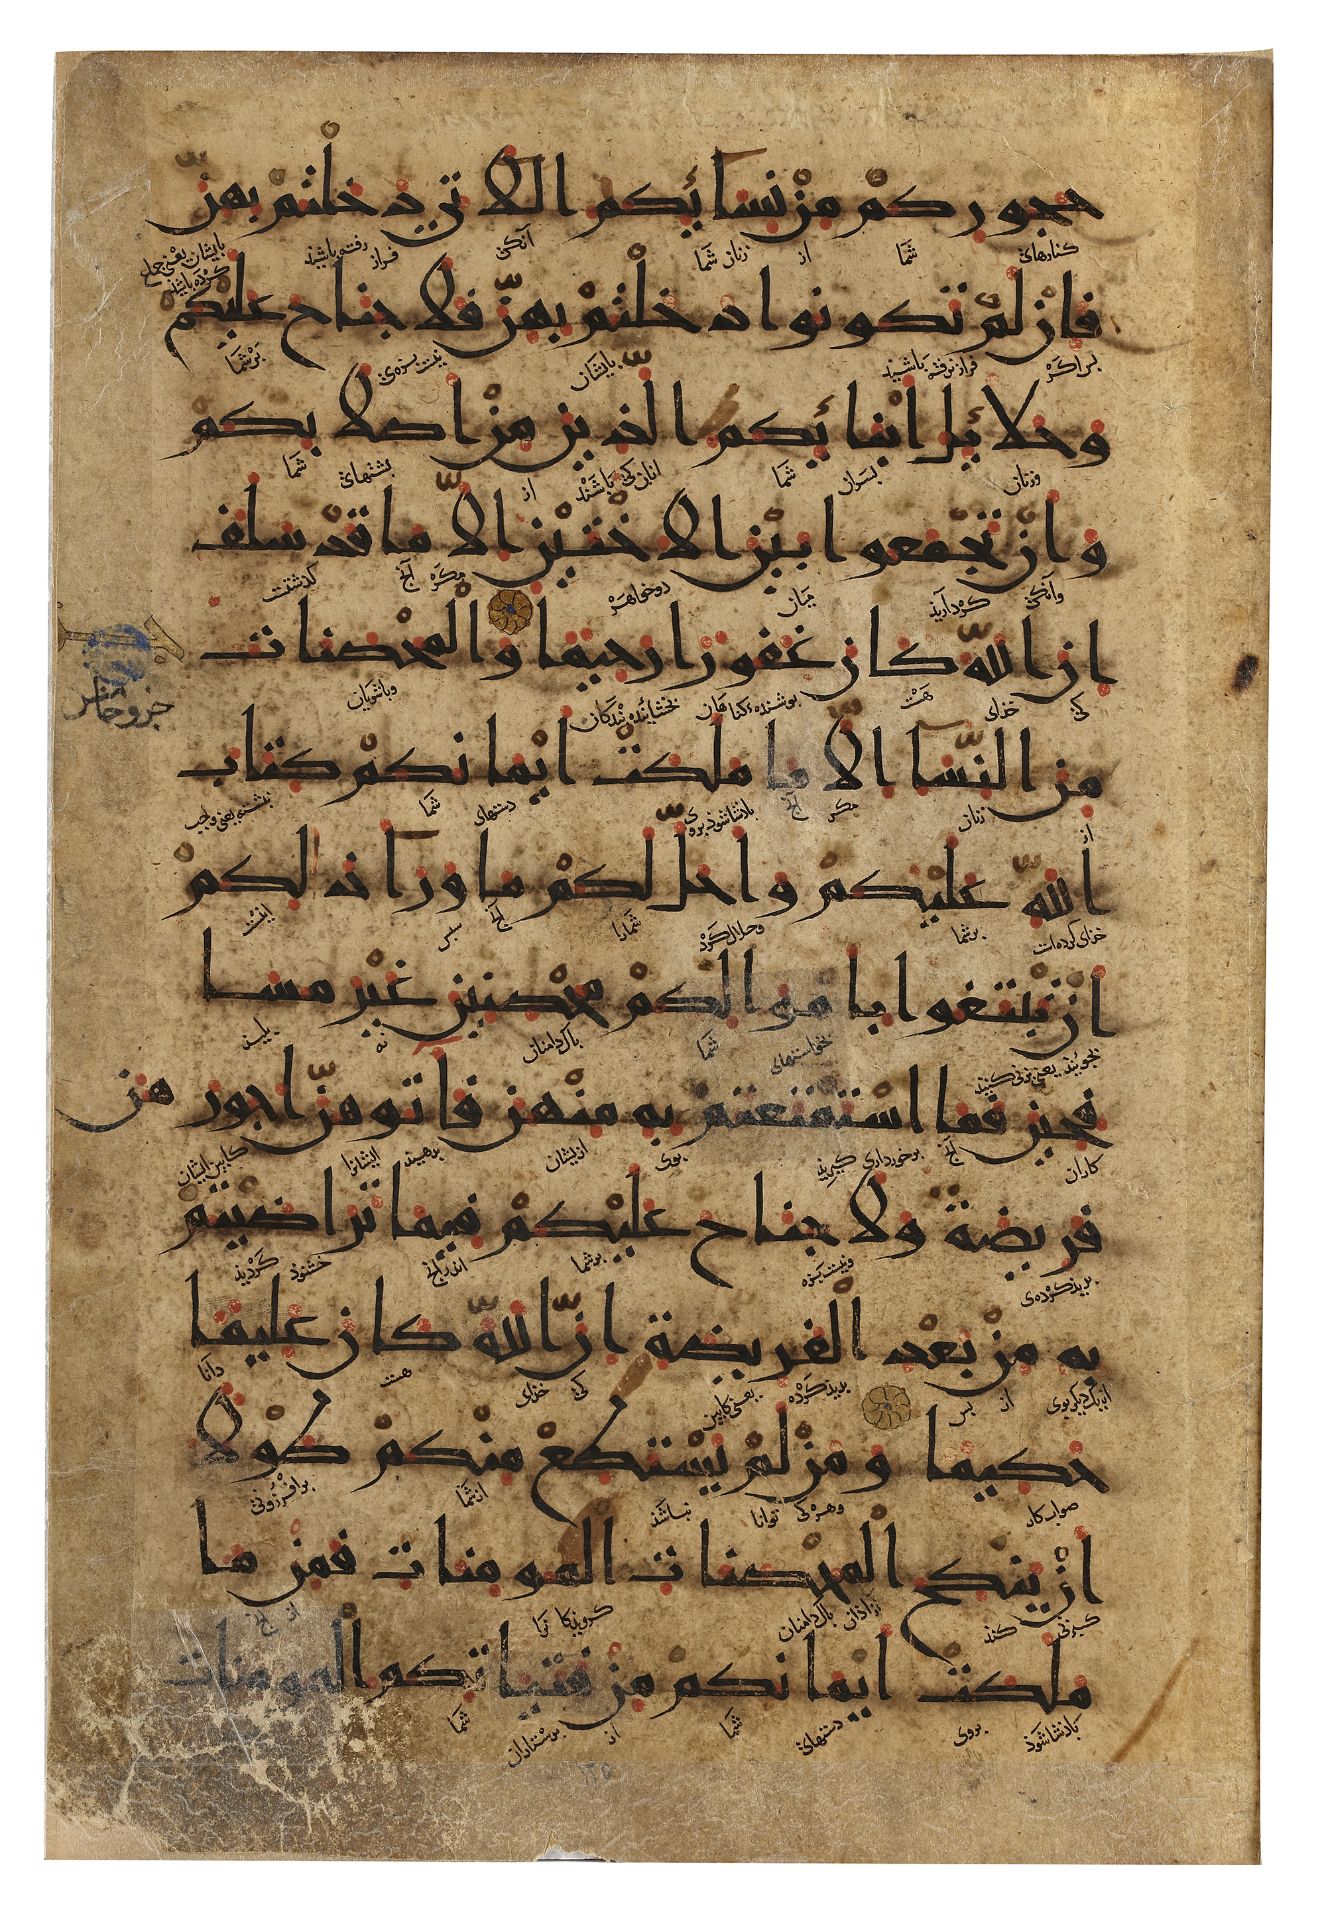 AN EASTERN KUFIC QURAN FOLIO, NEAR EAST, 12TH CENTURY - Image 2 of 2